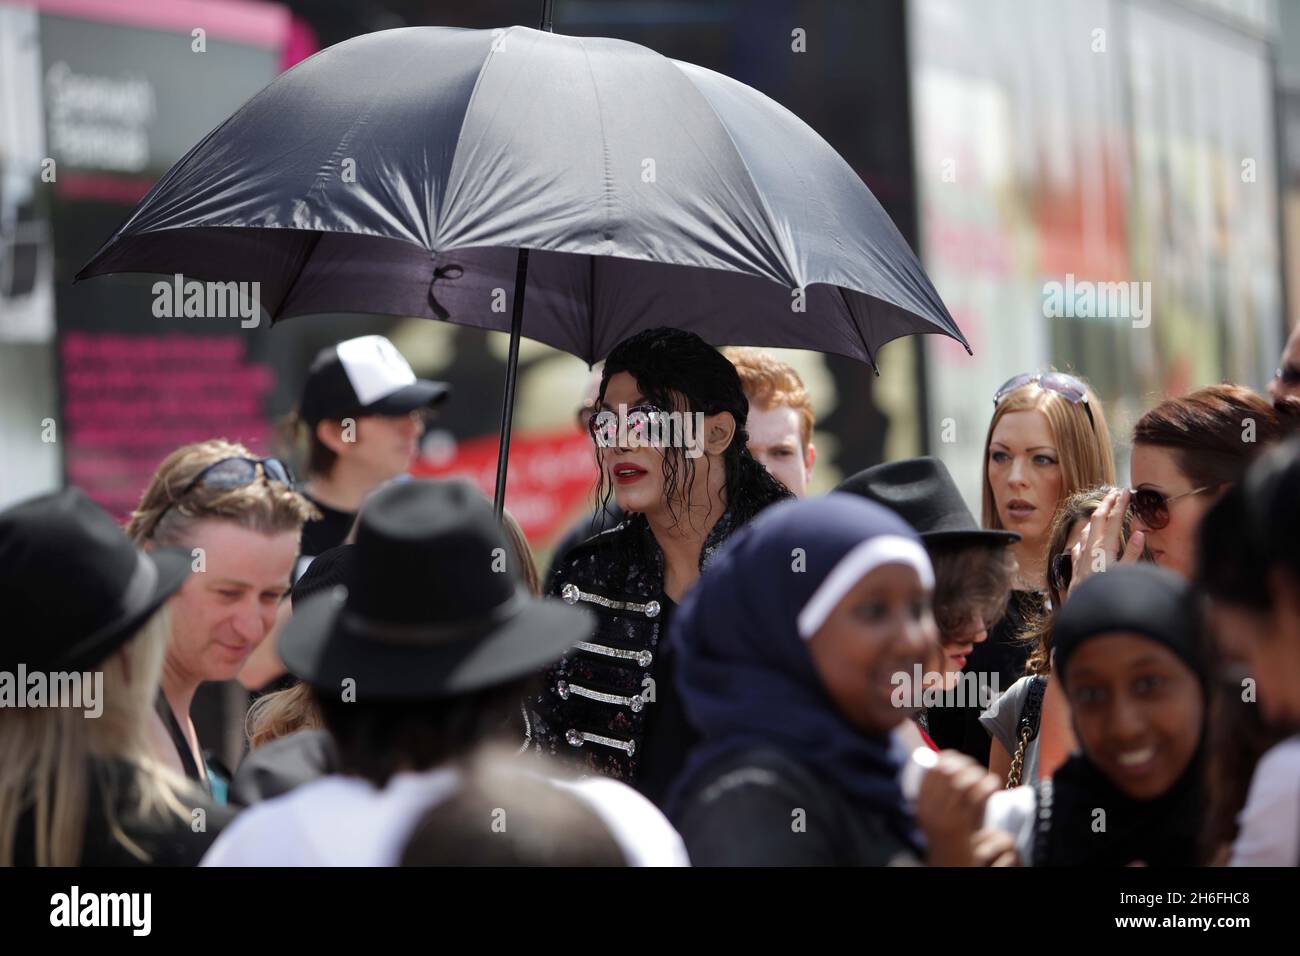 Michael Jackson fans gathered at the 02 arena in London today to mark the 1 year anniversary of the singers death. Jackson was preparing for a sold-out, 50-show residency at the arena before his sudden death. Picture shows: Navi, a Michael Jackson impersonator and tribute act, arriving at the arena Stock Photo